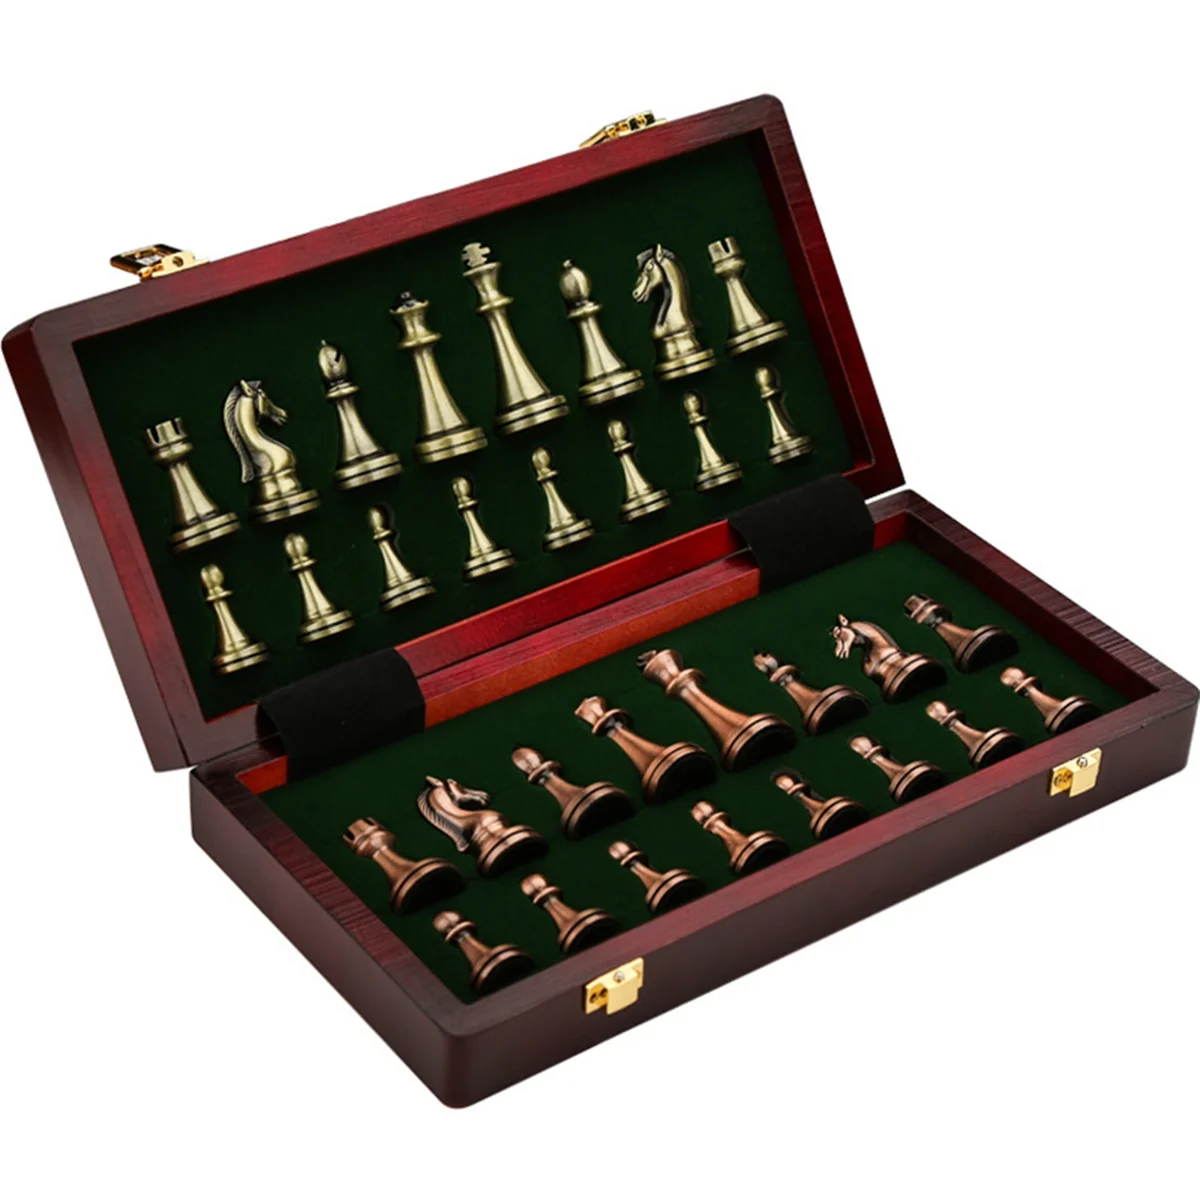 zinc-alloy-chess-retro-board-set-for-adults-chess-folding-portable-chess-game-for-tournament-beginner-12inch-2-players